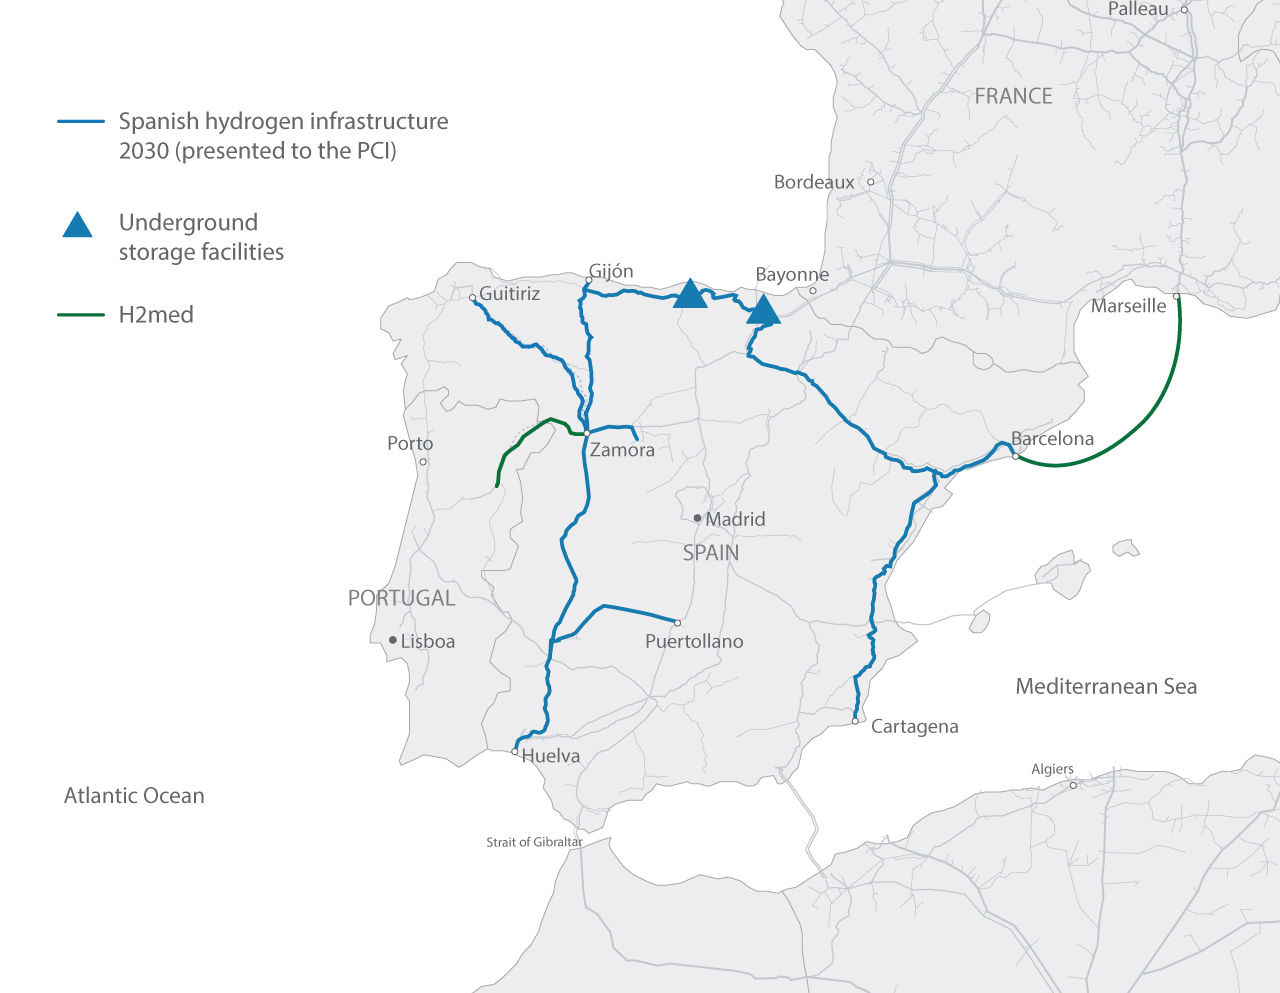 Spanish hydrogen infrastructure 2030 (presented to the PCI)